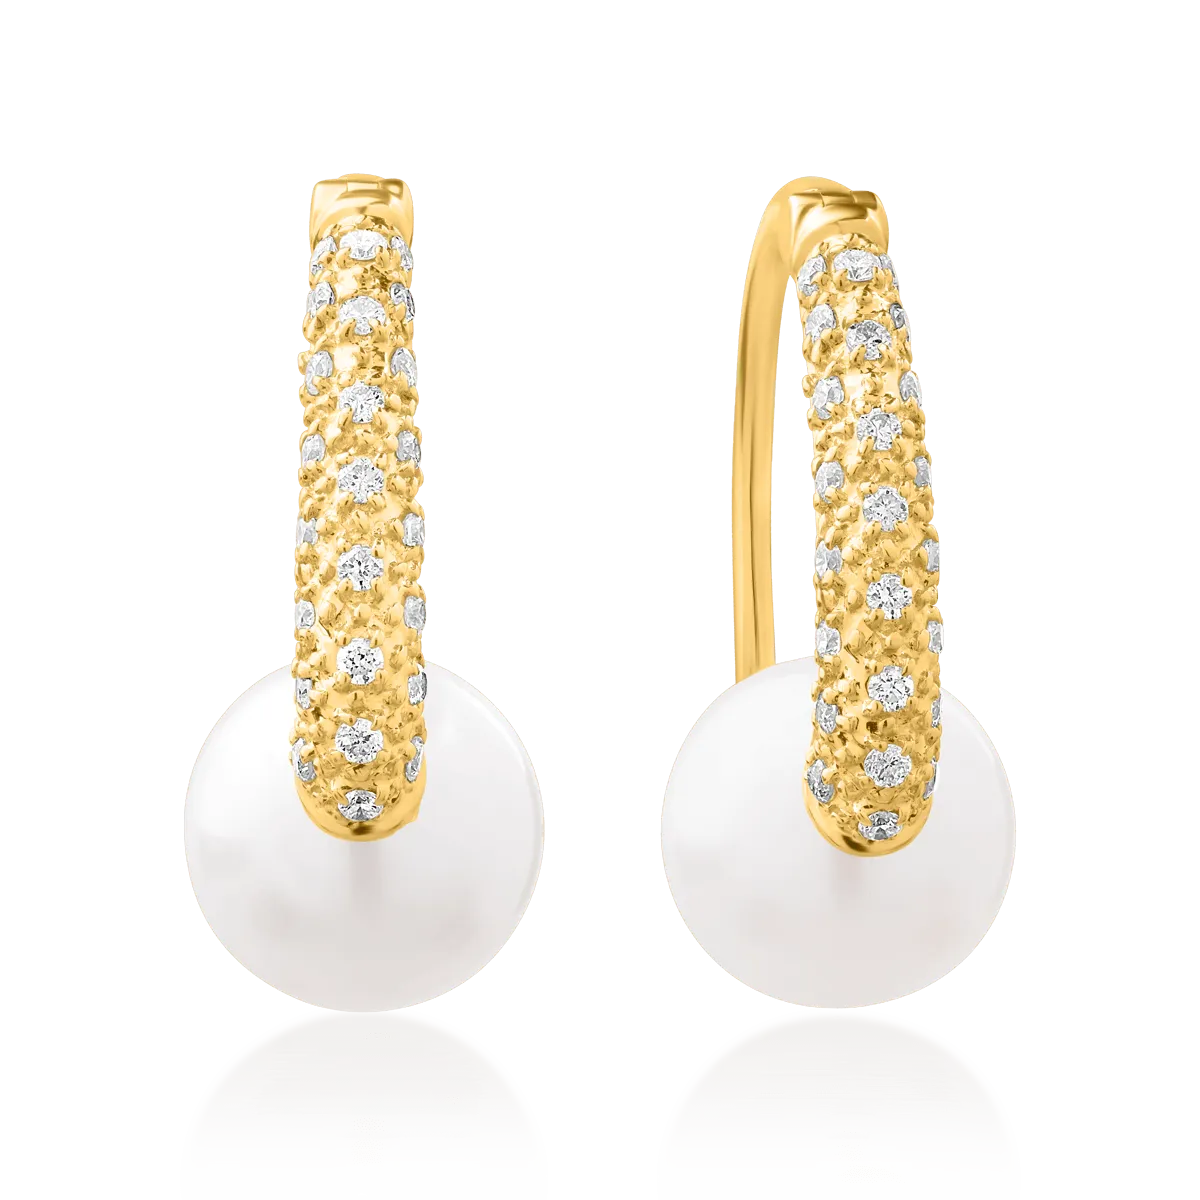 14K yellow gold earrings with 5.19ct fresh water cultured pearls and 0.17ct diamonds